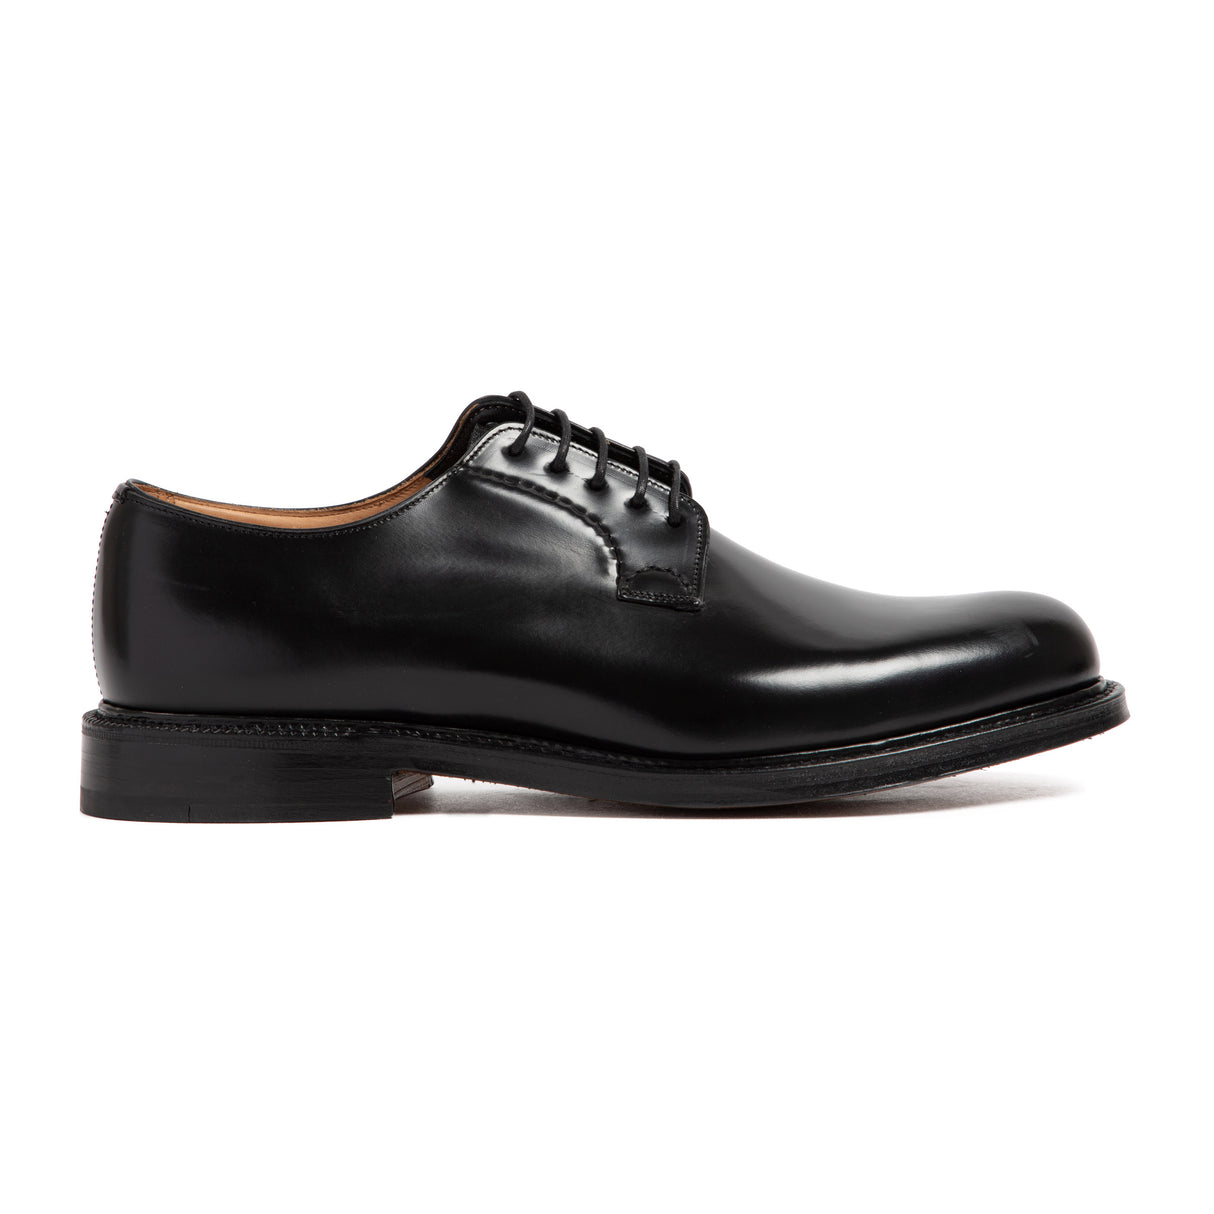 CHURCH'S Classic Black Leather Oxford Shoes for Men - FW23 Collection